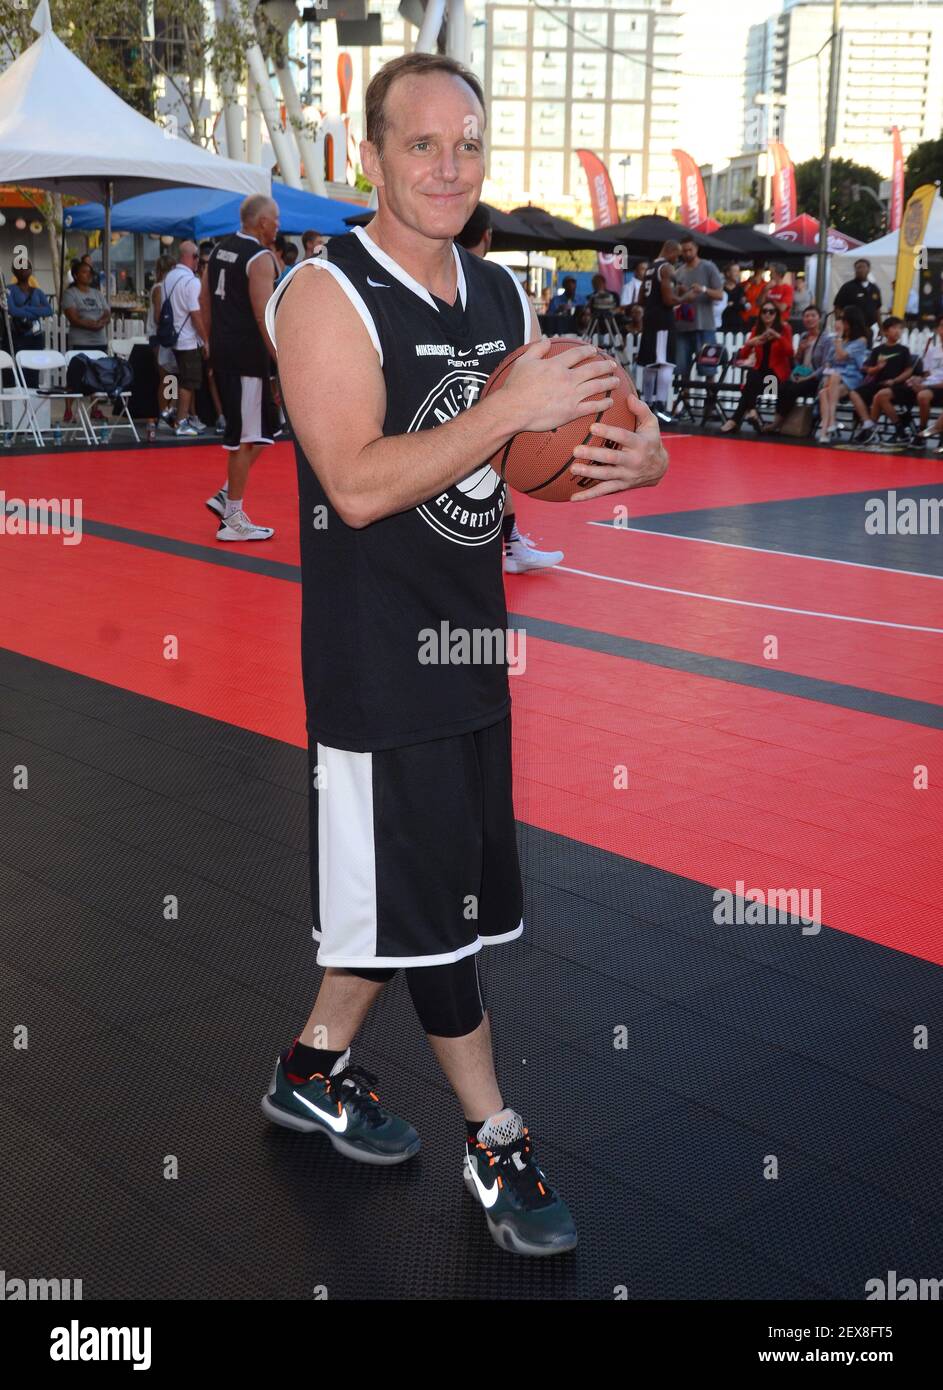 07 August 2015 - Los Angeles, California - Clark Gregg. The 7th Annual Nike  Basketball 3on3 Tournament presents ESPNLA All-Star Celebrity Basketball  Game held at L.A. Live Microsoft Square. Photo Credit: Birdie